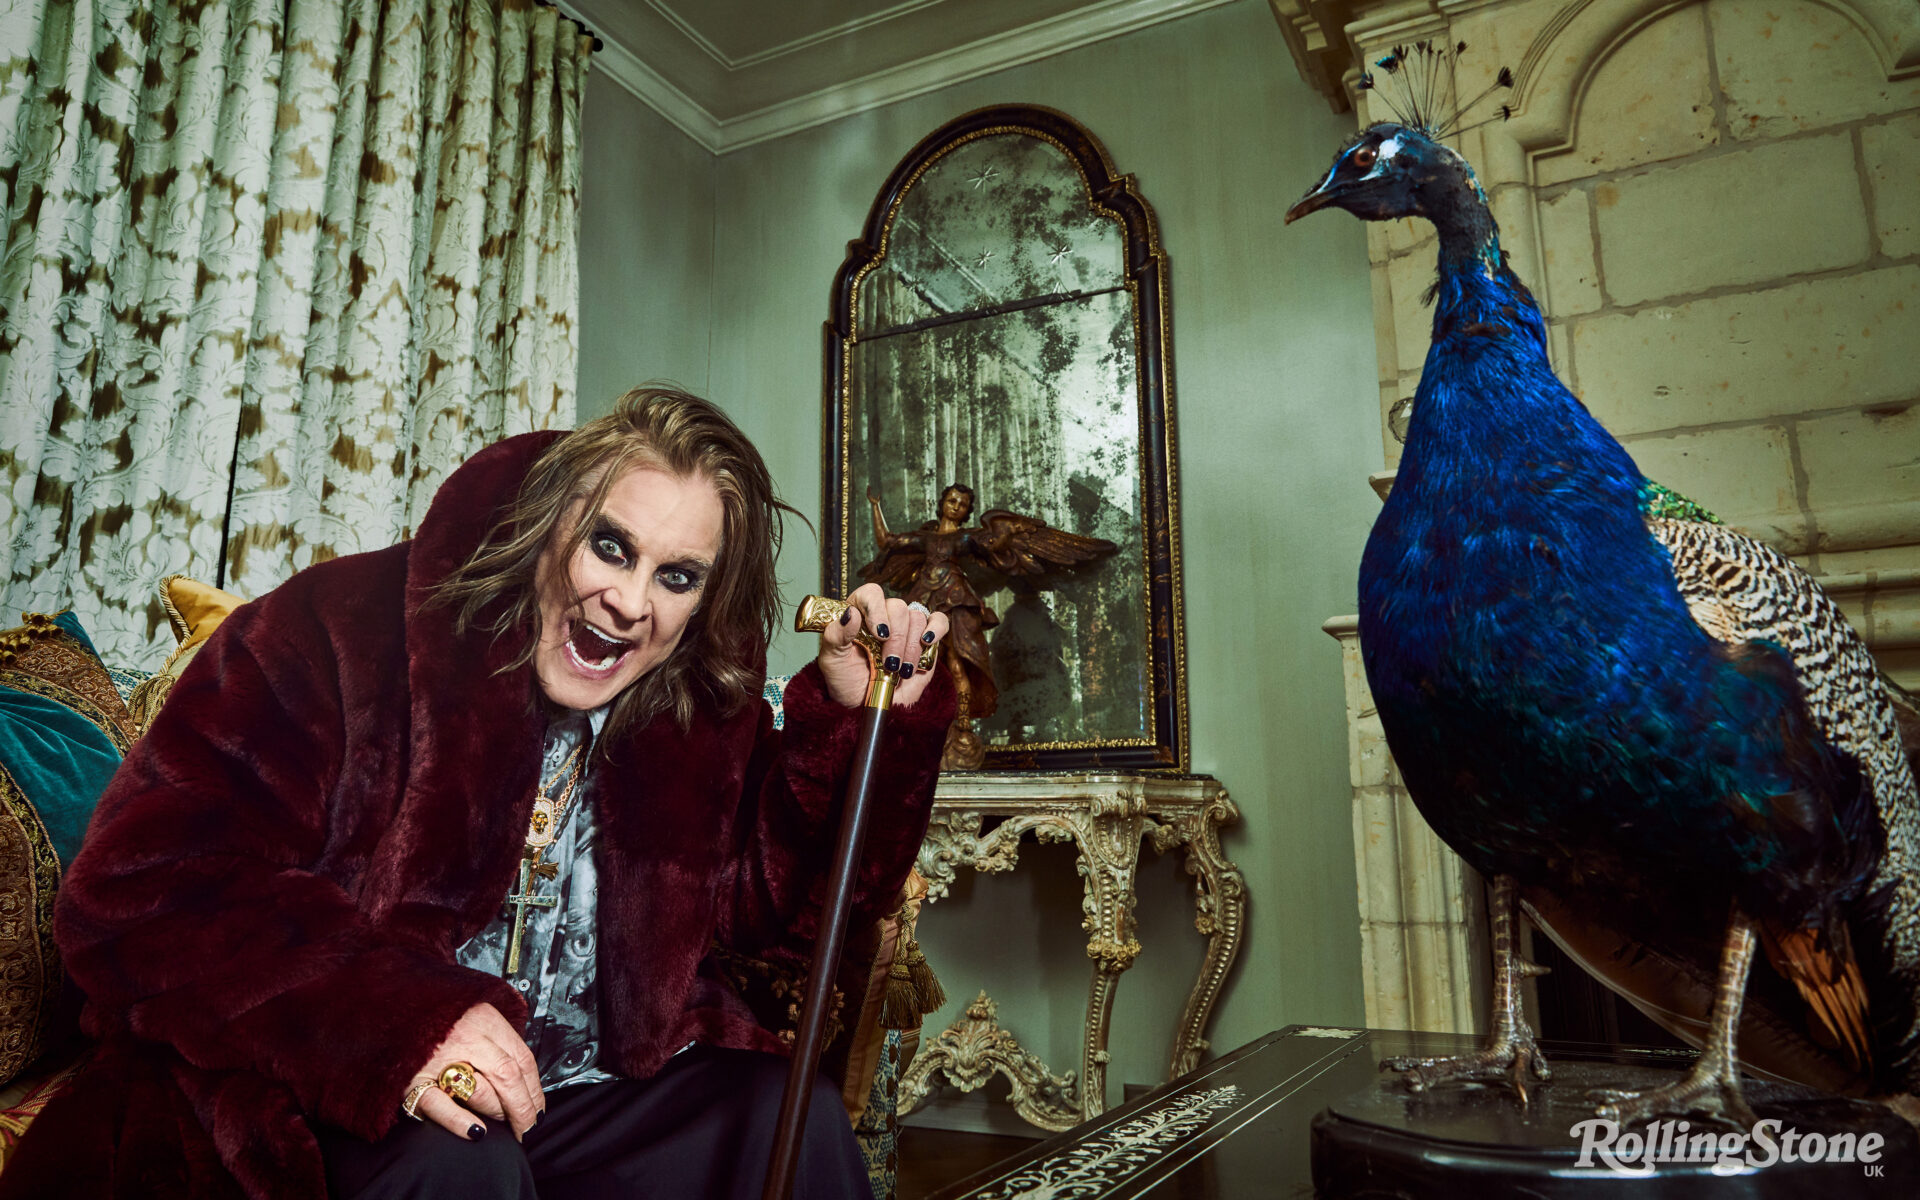 Sharon Osbourne says Ozzy will perform two farewell shows in Birmingham